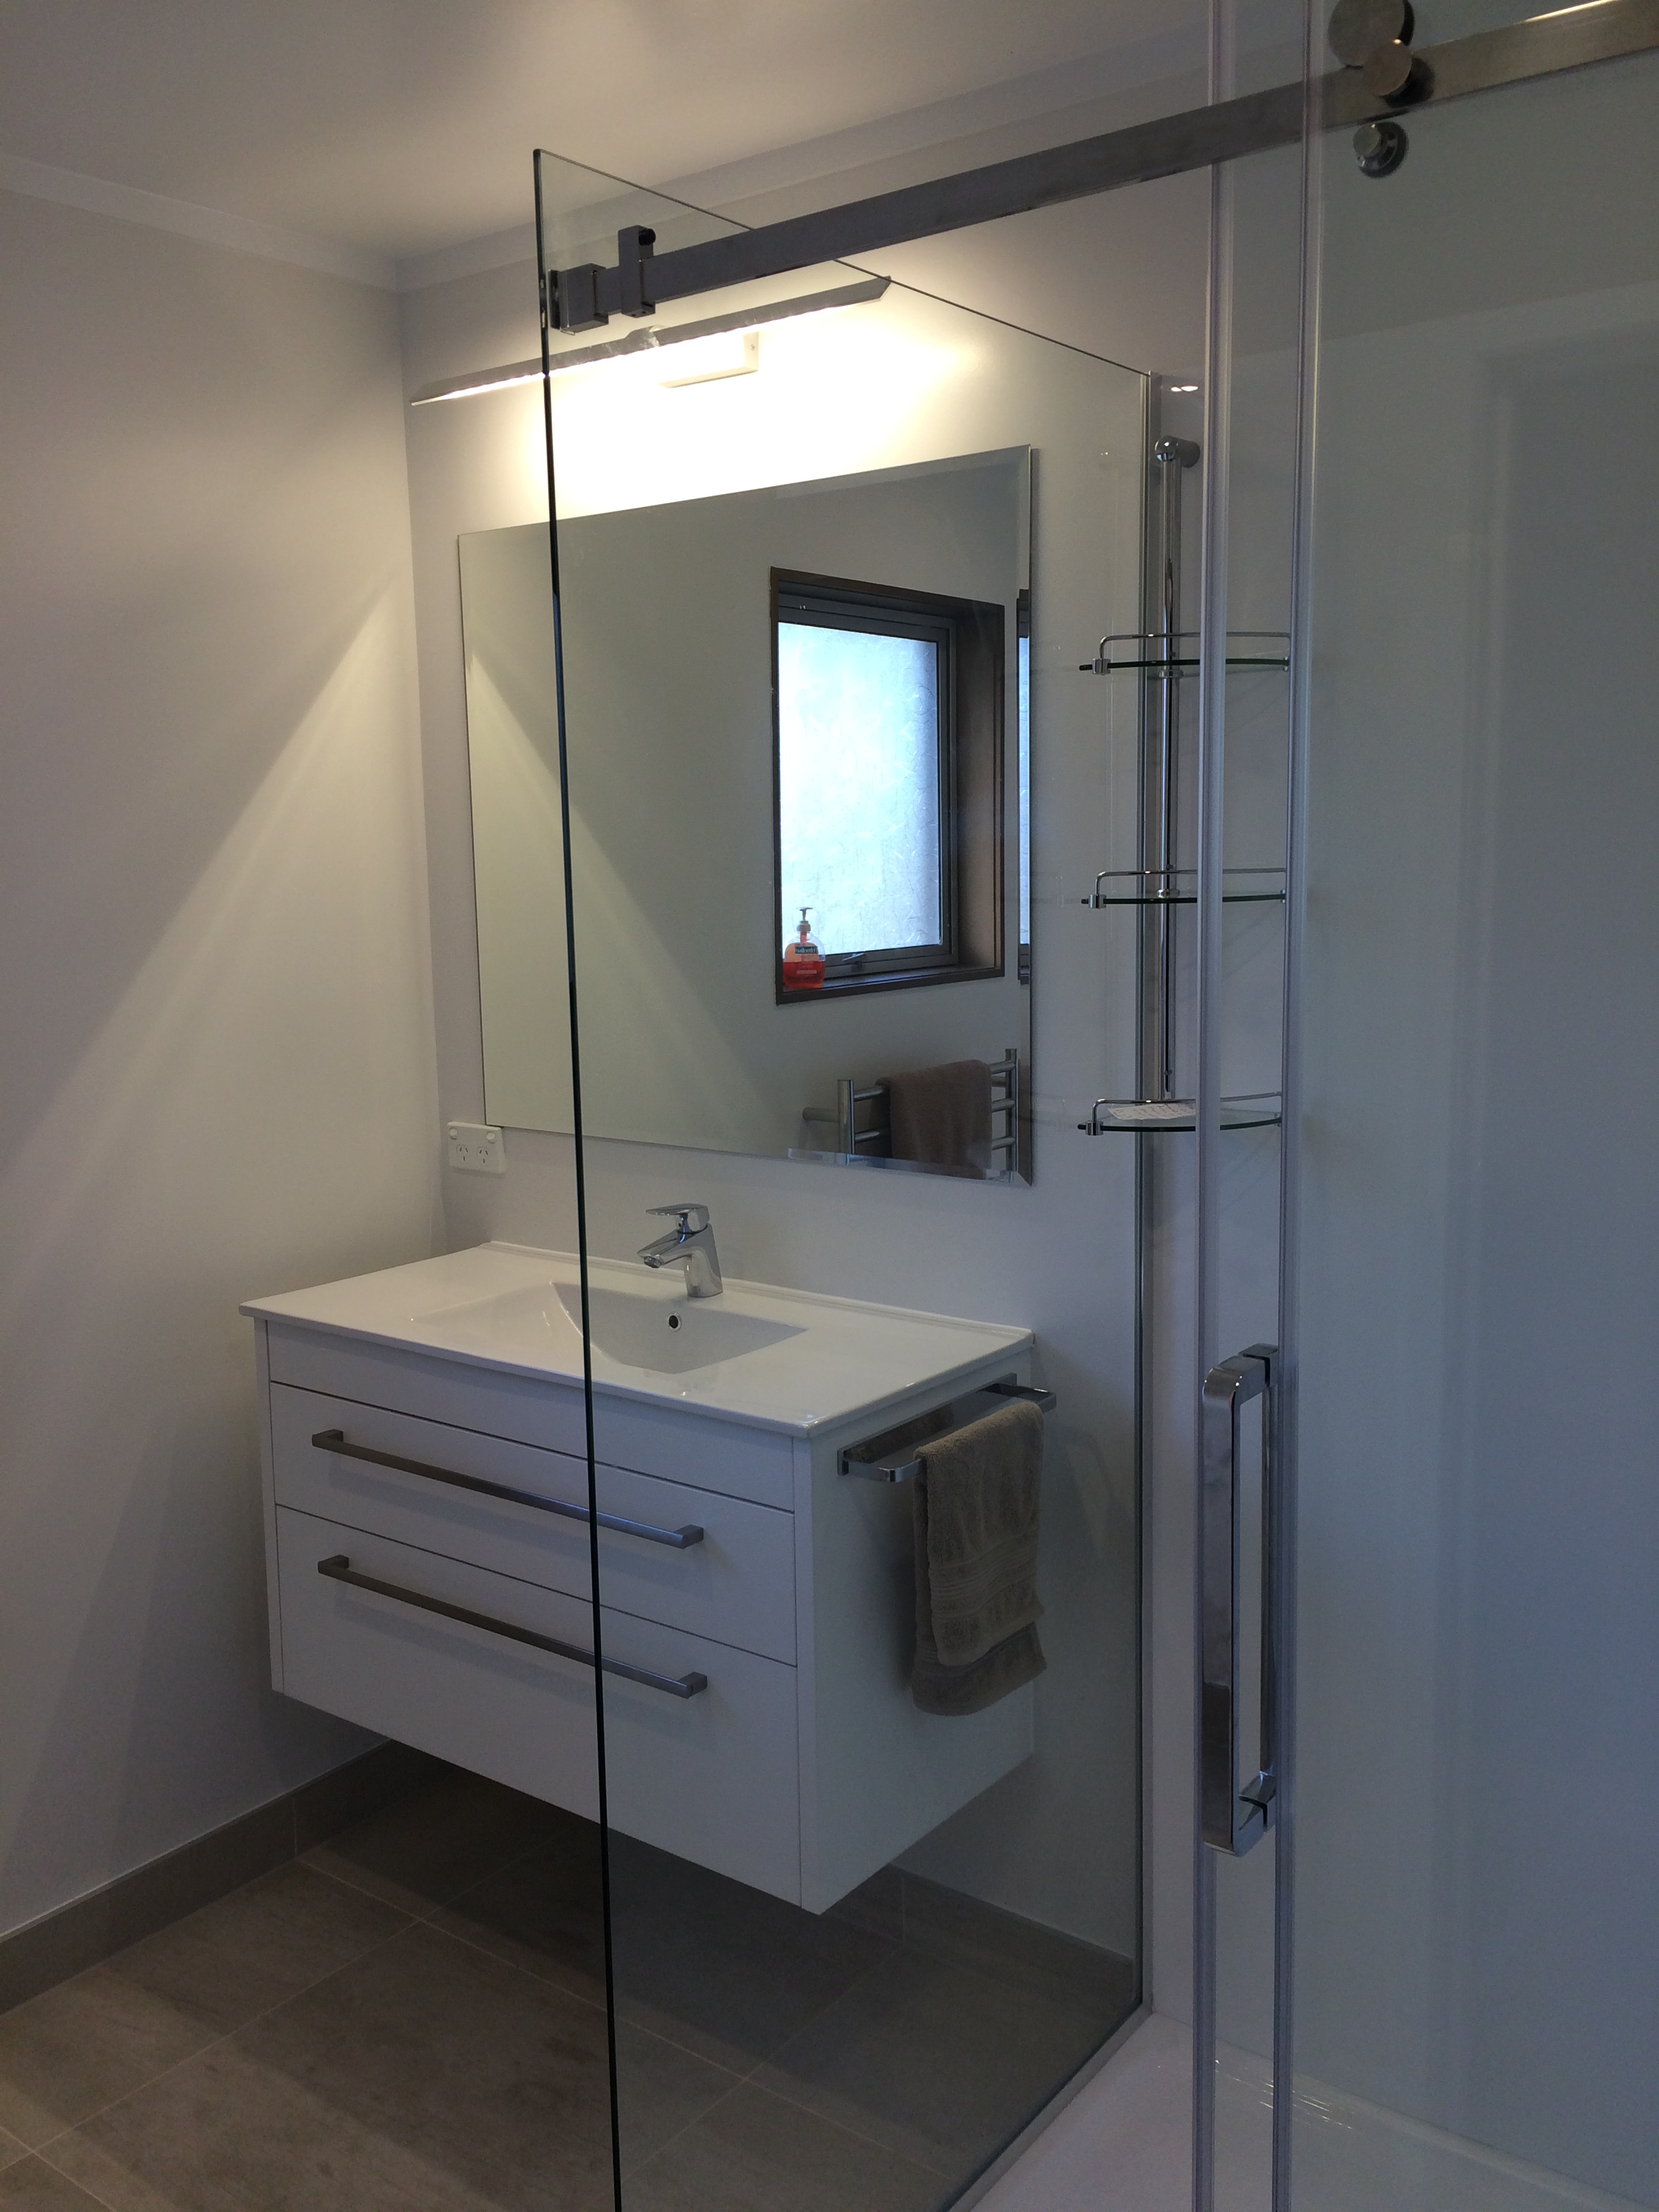 Bathrooms & Kitchens renovation in Helvetia Drive, Browns Bay